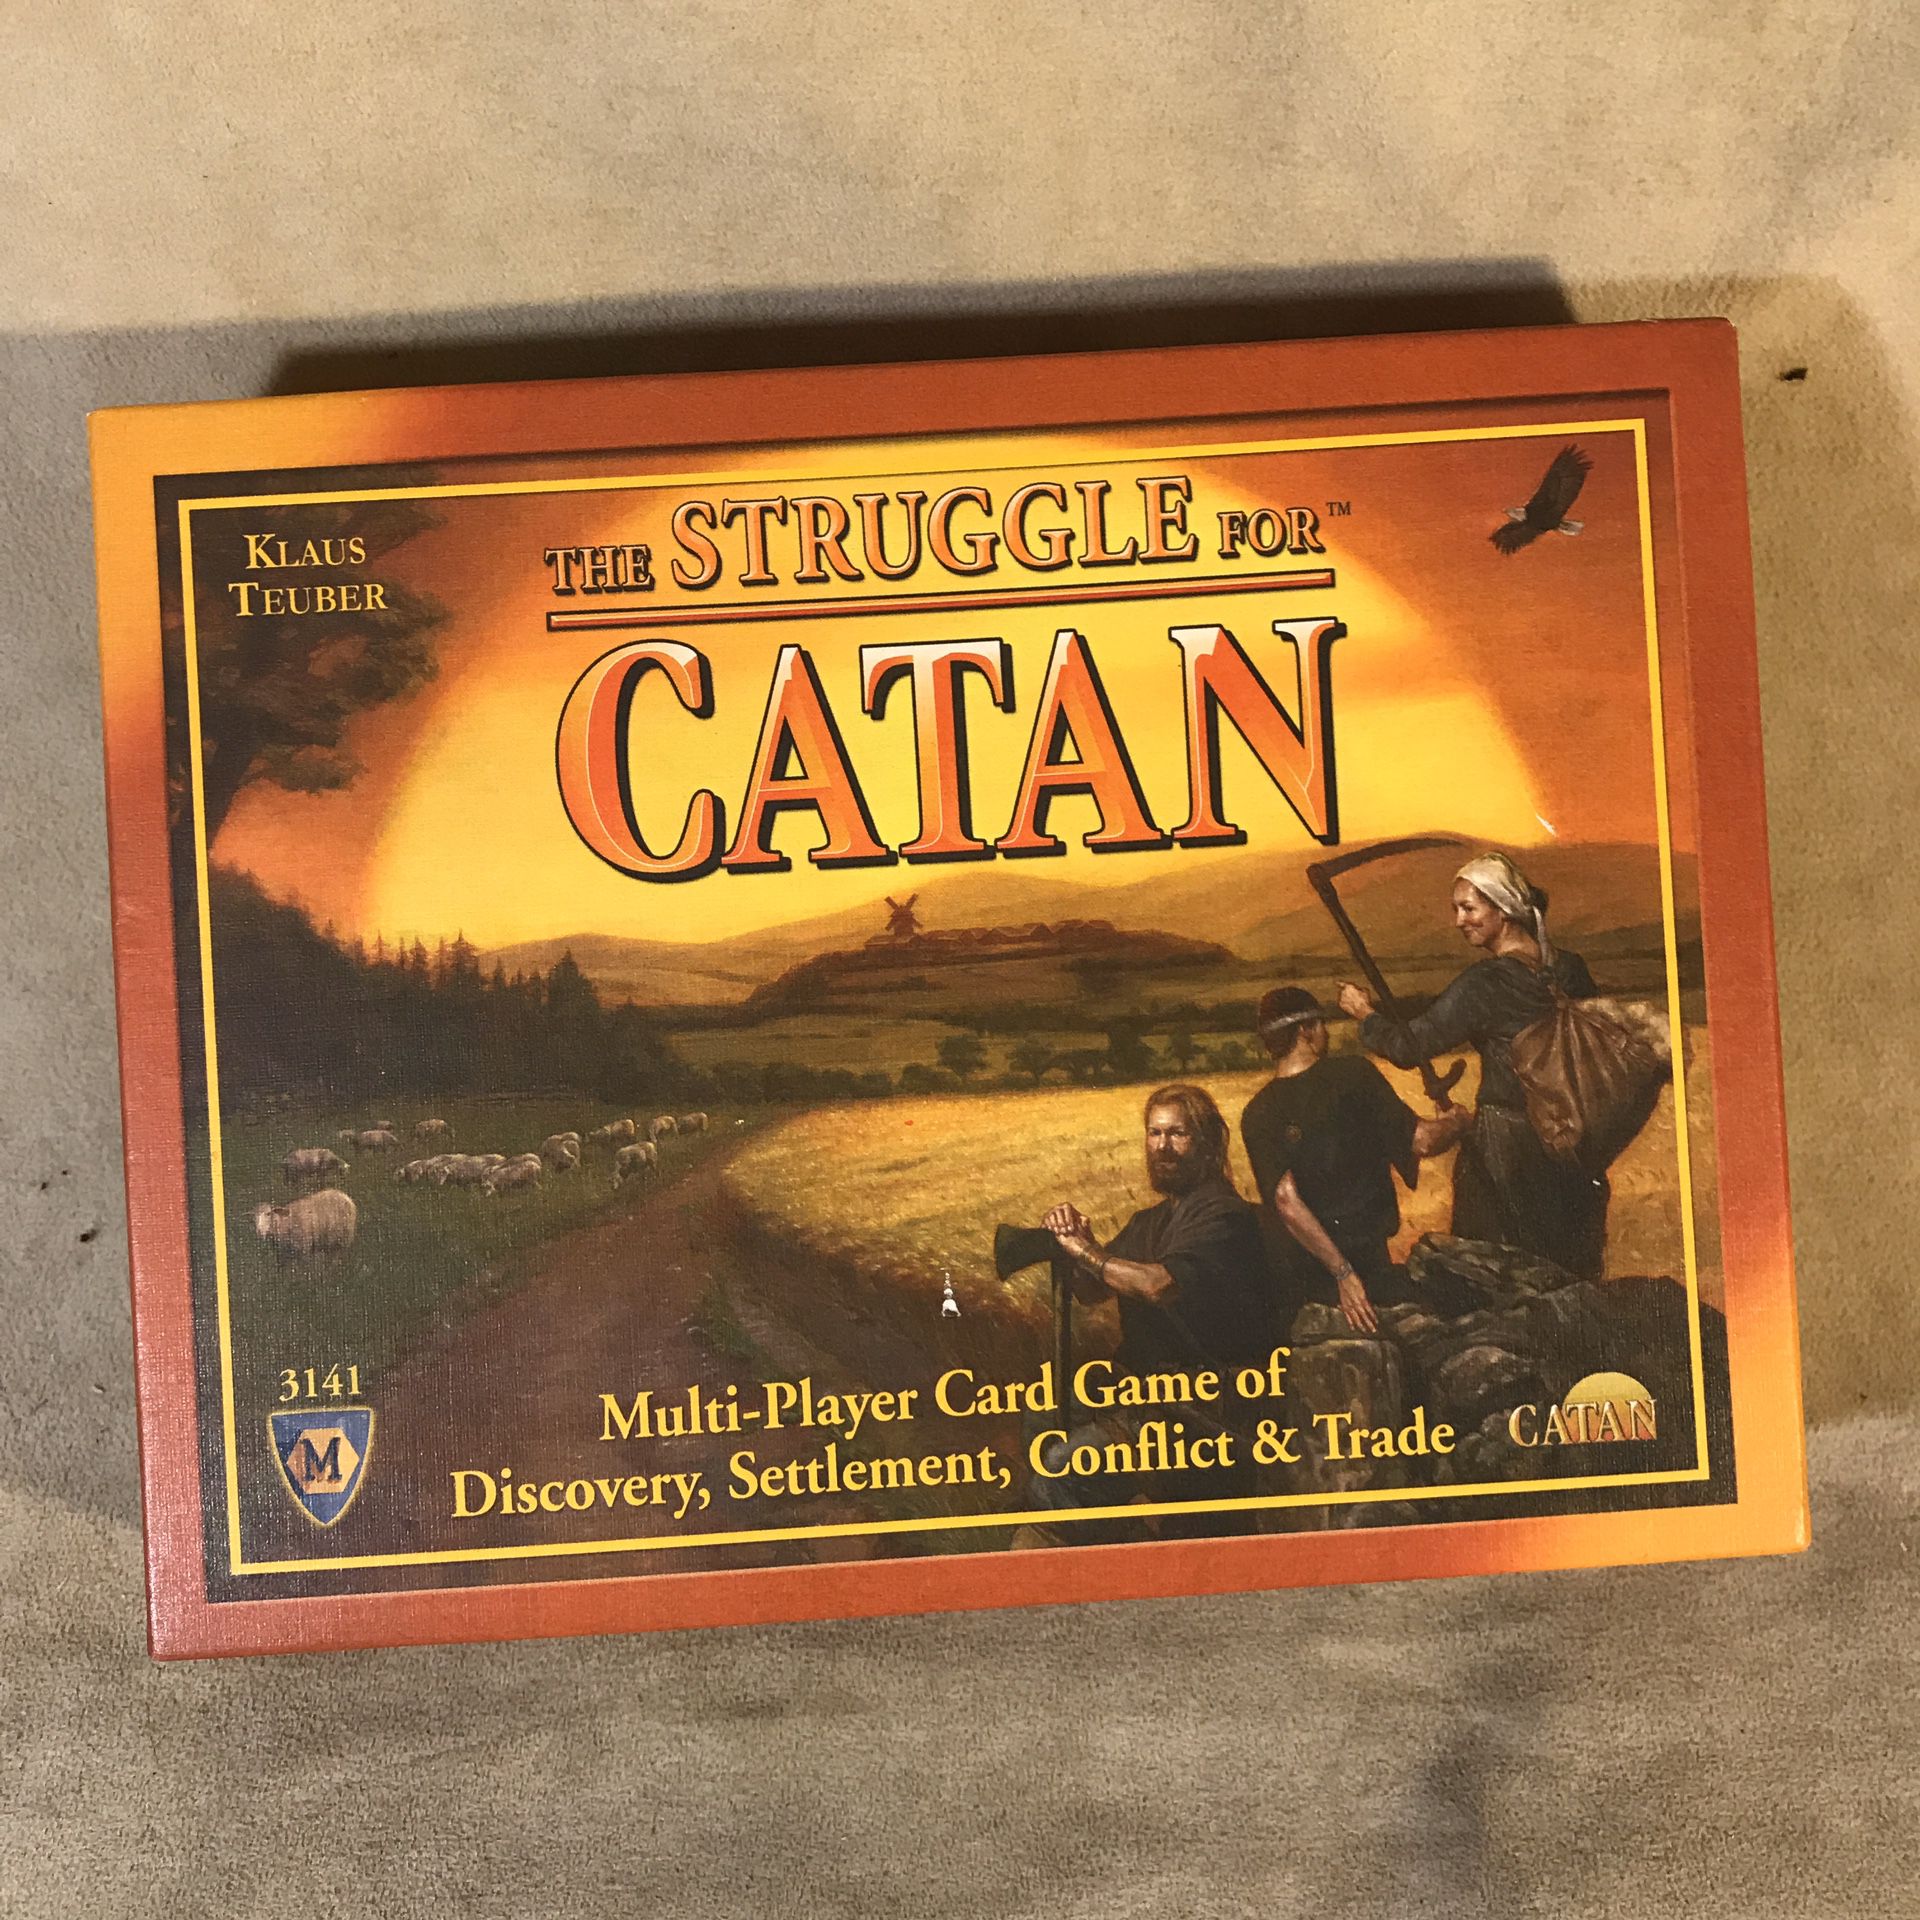 The Struggle for Catan Card Game